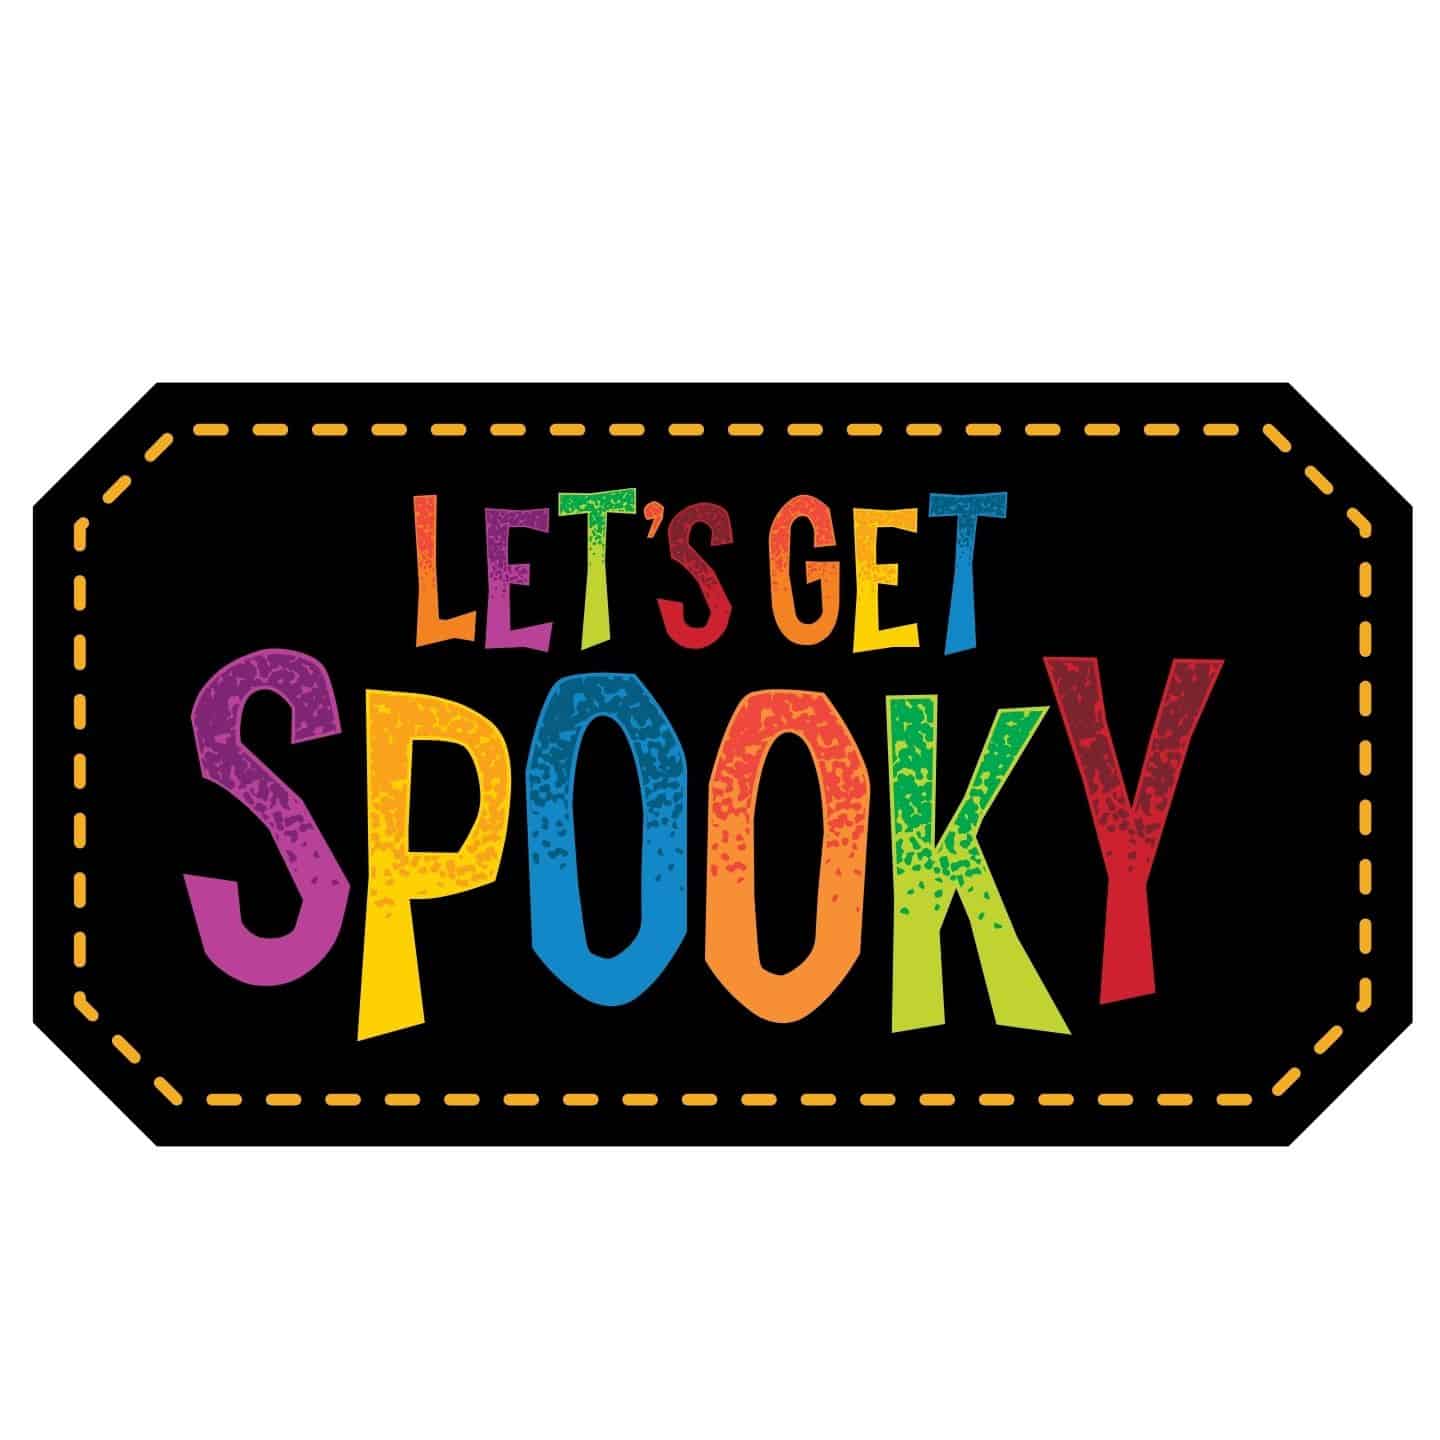 Lets Get Spooky